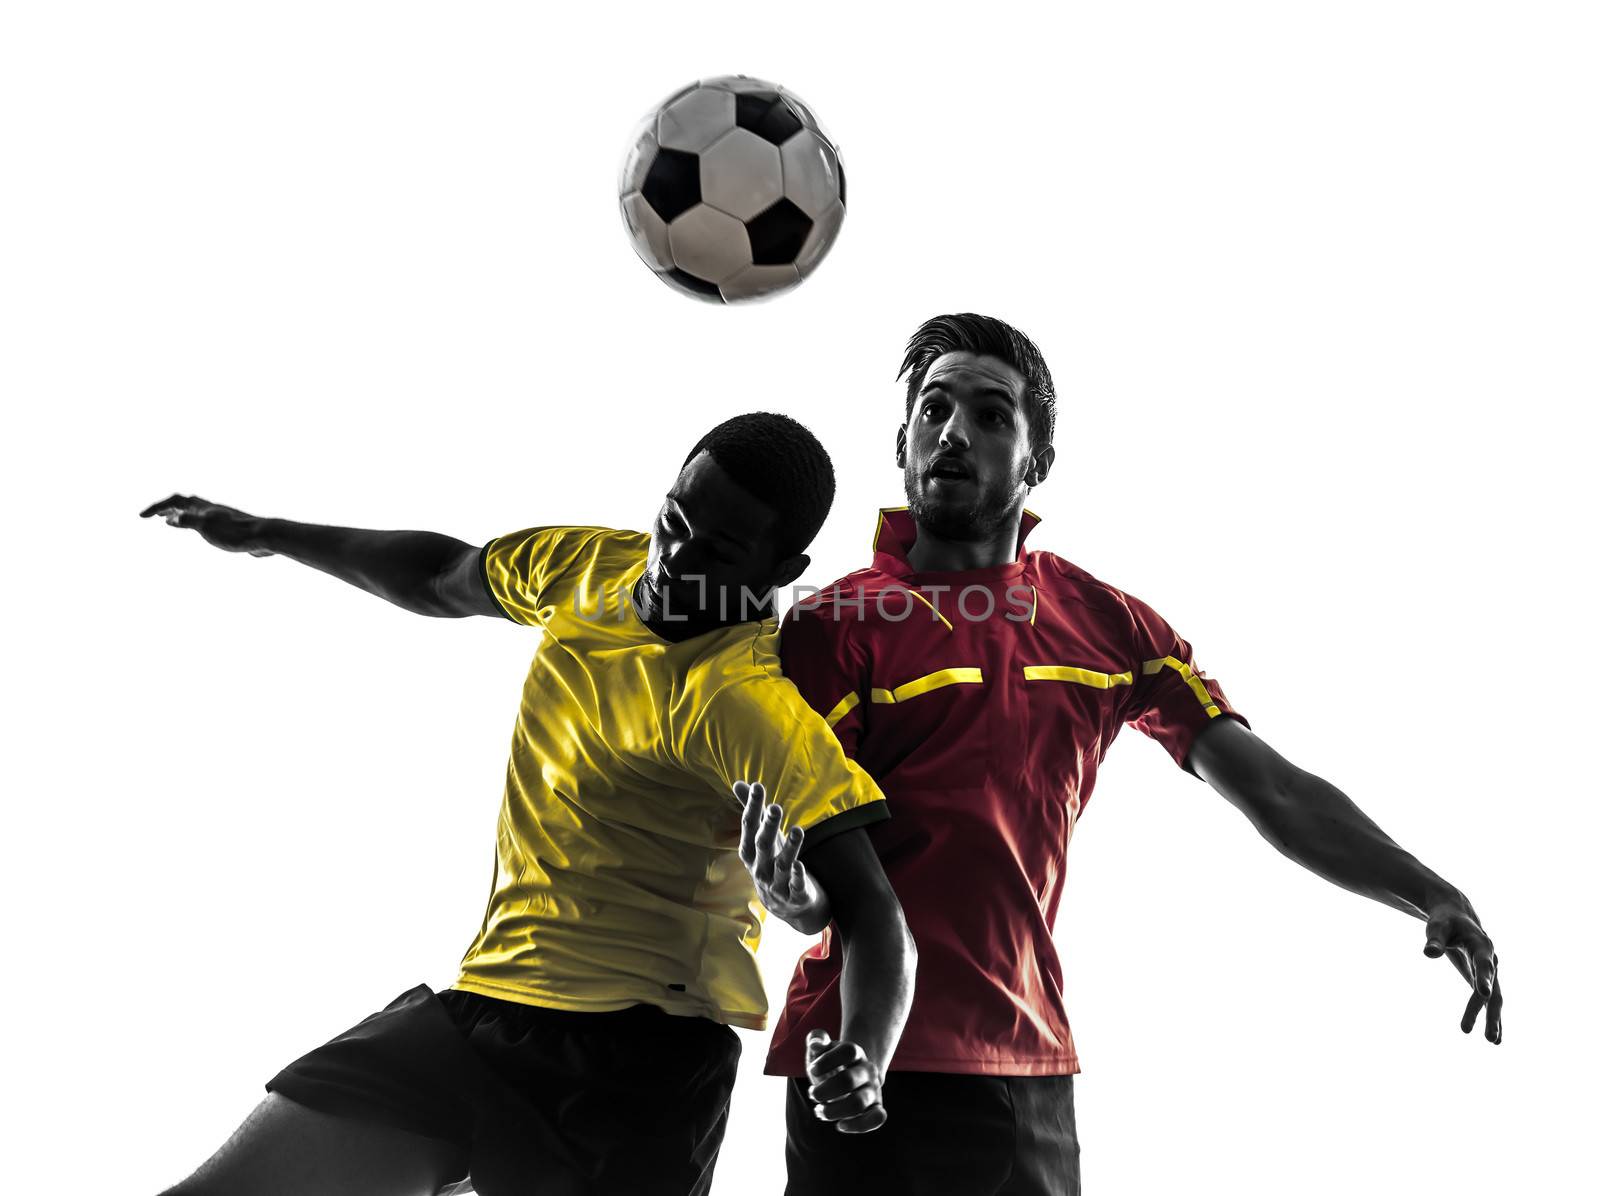 two men soccer player playing football competition fighting for a ball in silhouette on white background